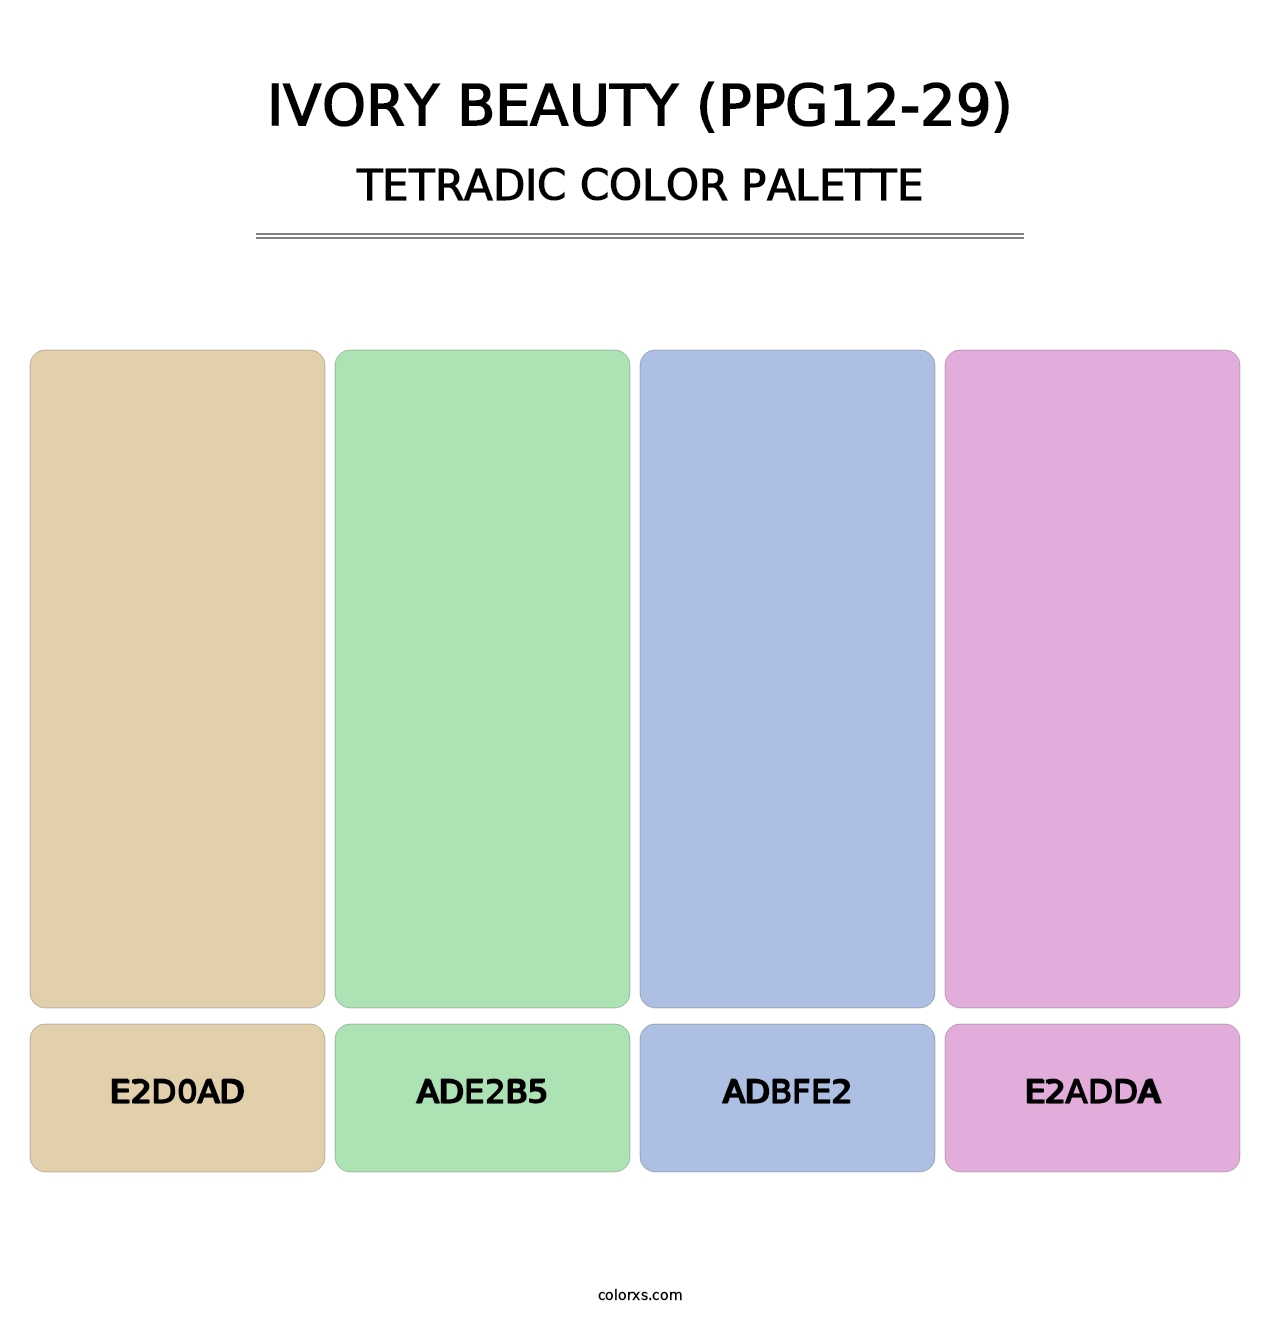 Ivory Beauty (PPG12-29) - Tetradic Color Palette